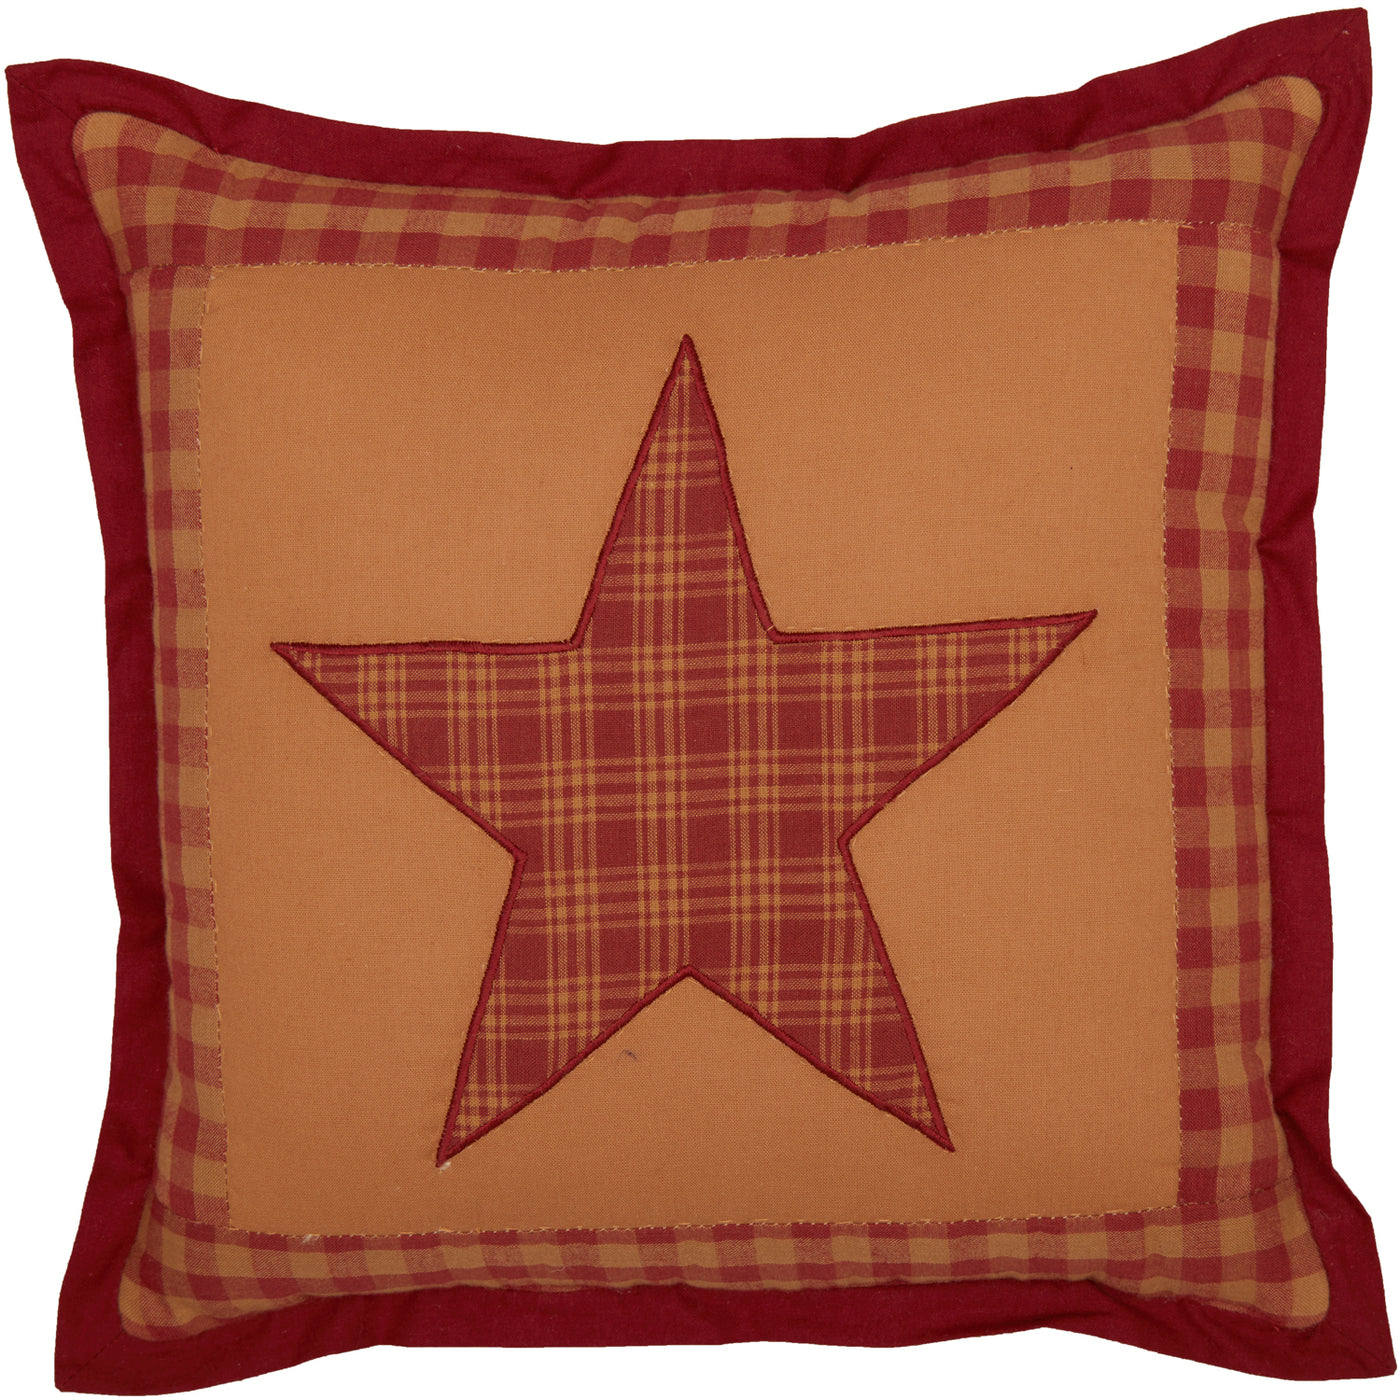 Ninepatch Star Quilted 12" Throw Pillow